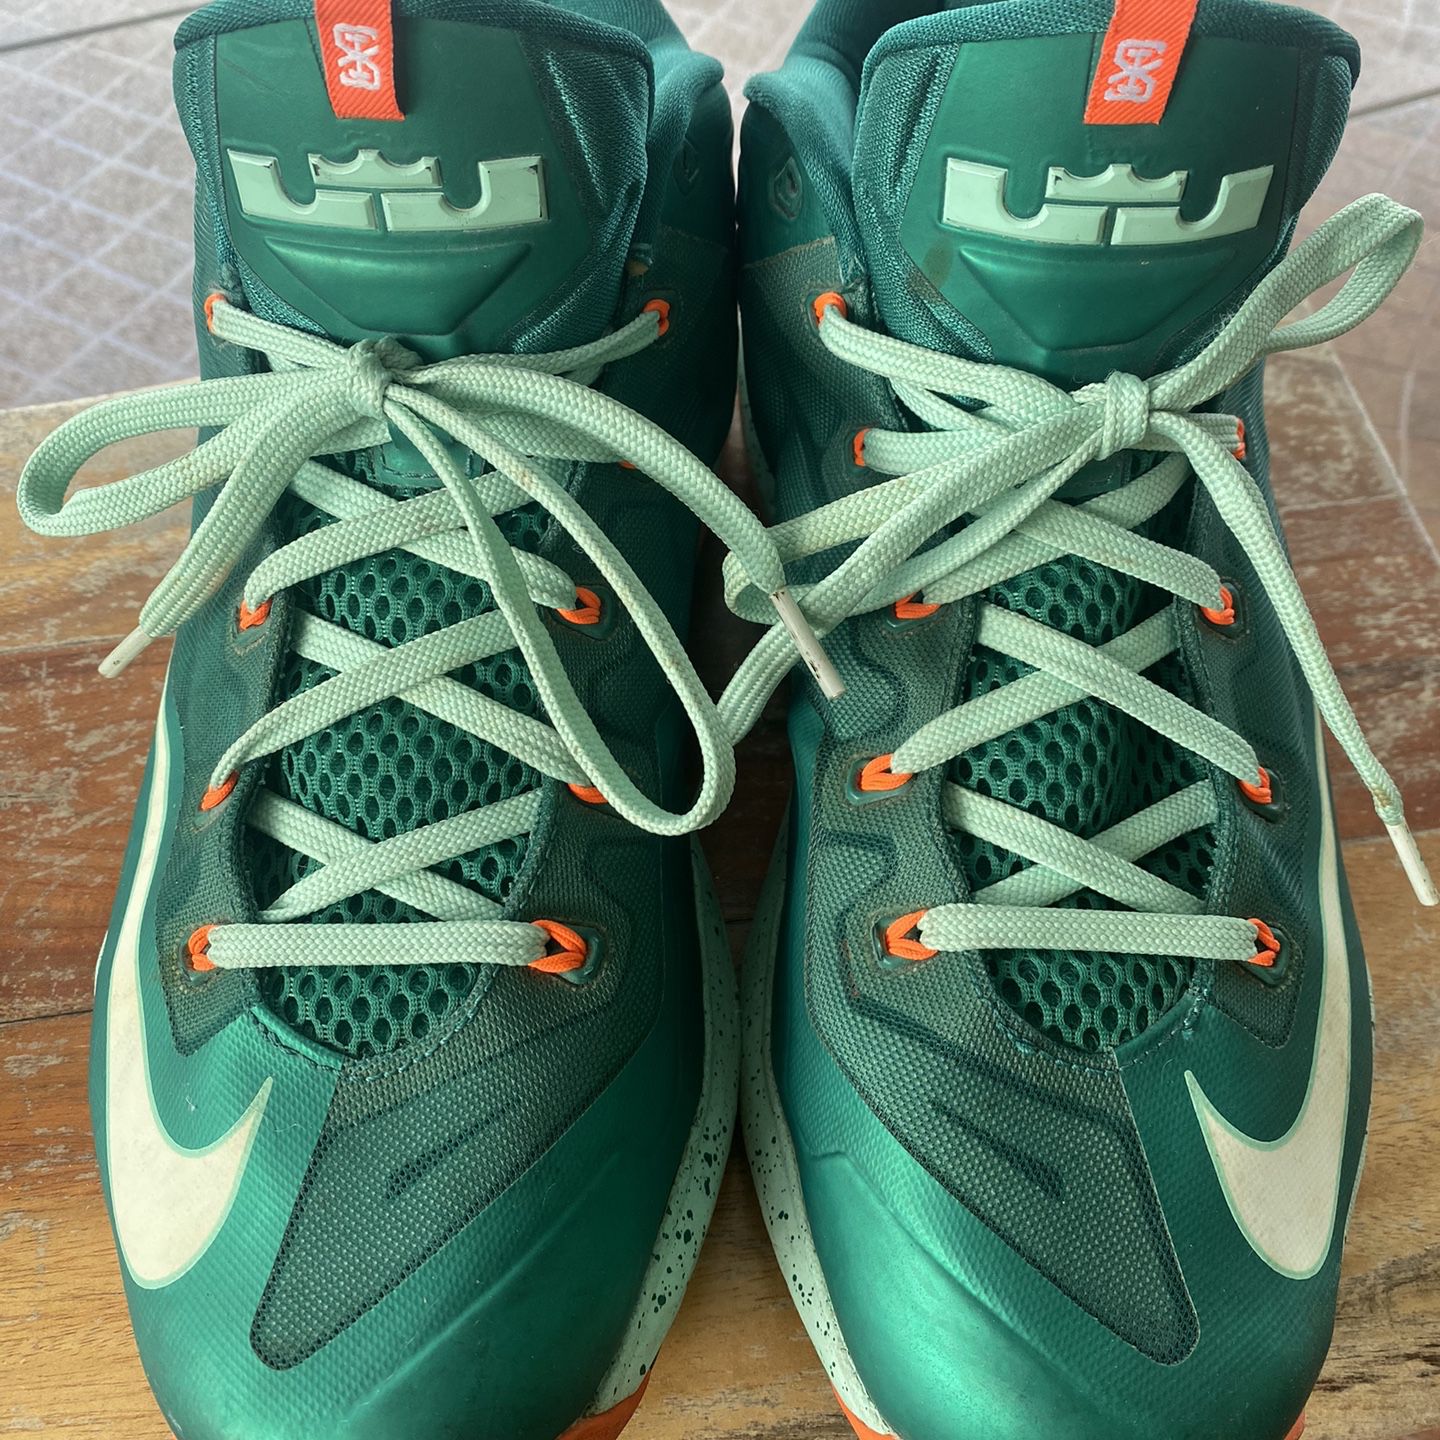 Nike Max LeBron 11 Low Biscayne Size 12